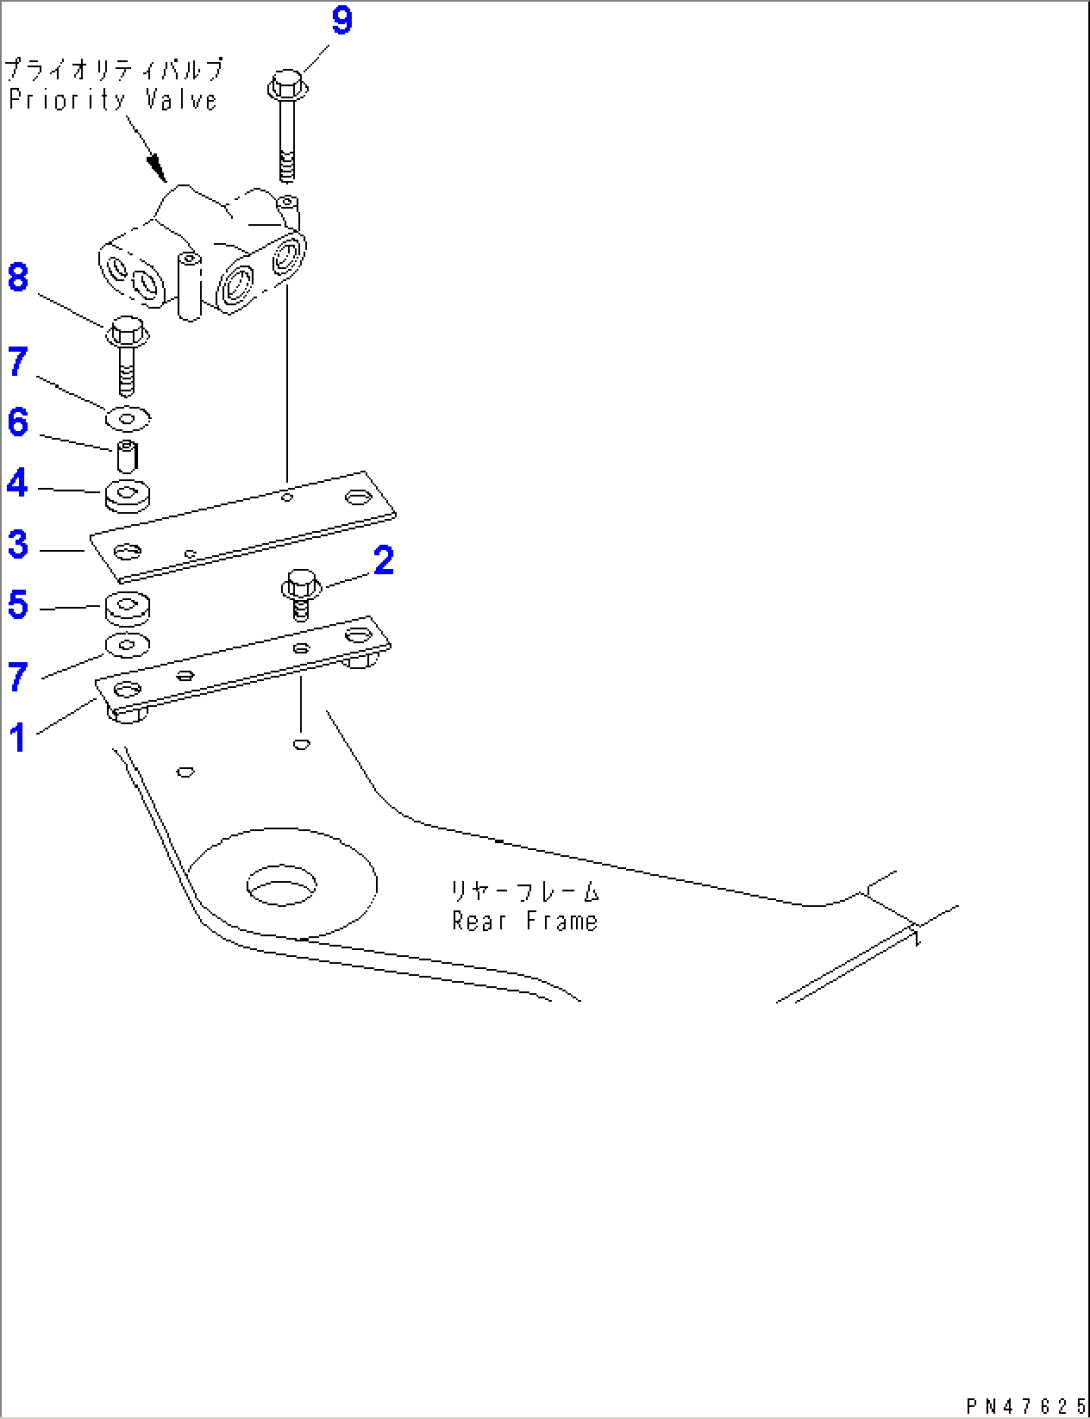 PRIORITY VALVE MOUNTING PARTS(#50001-)